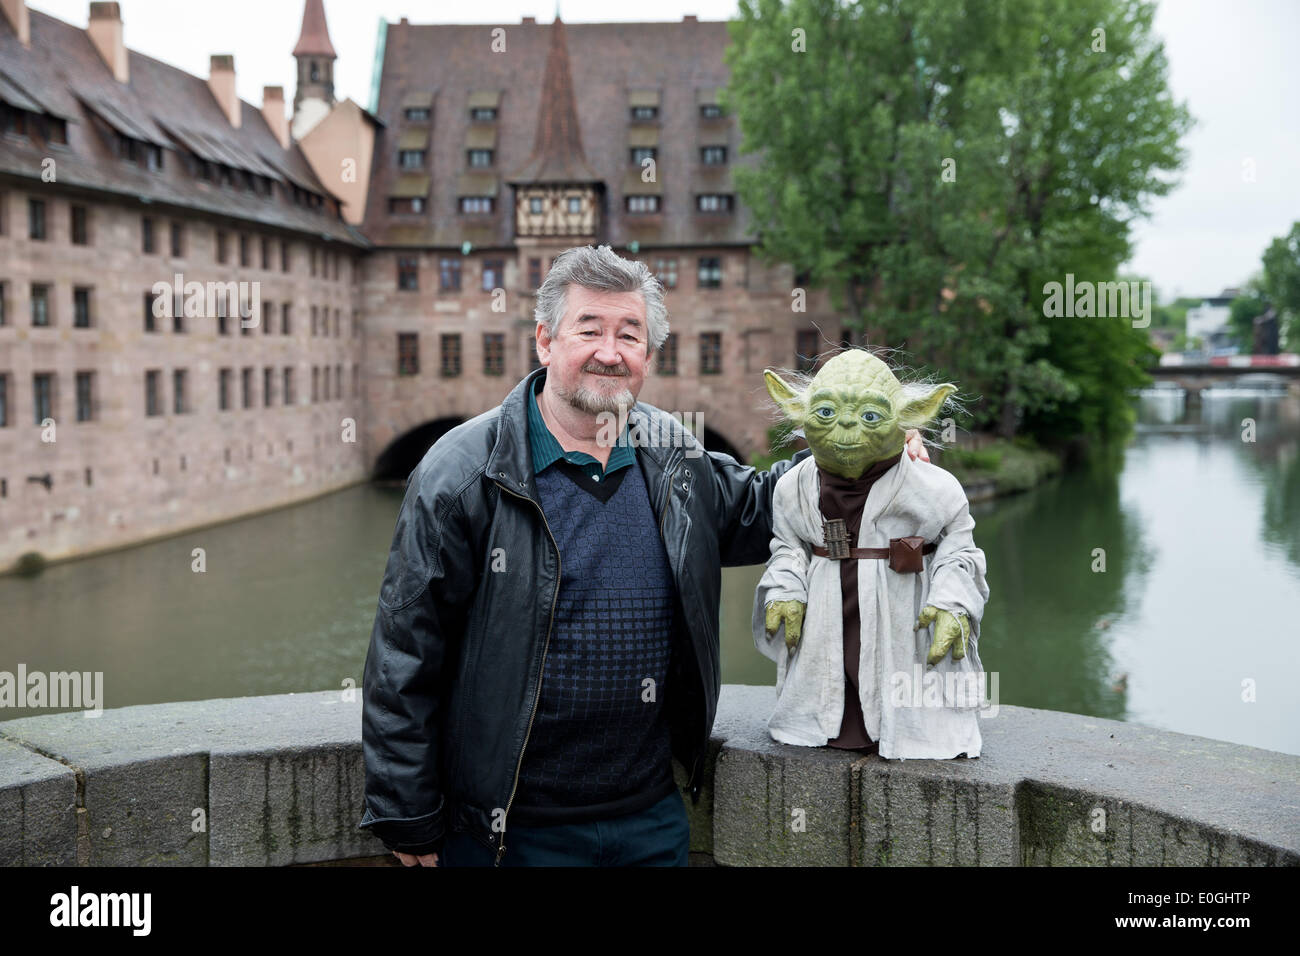 Nuremberg, Germany. 07th May, 2014. Make-up artist Nick Maley, one of the designers of Yoda from the science fiction film Star Wars stands with a Yoga figure at the old town in Nuremberg, Germany, 07 May 2014. 64 year-old is planning a new museum for special effects, fantasy and science fiction films in Nuremberg. Photo: DANIEL KARMANN/dpa/Alamy Live News Stock Photo